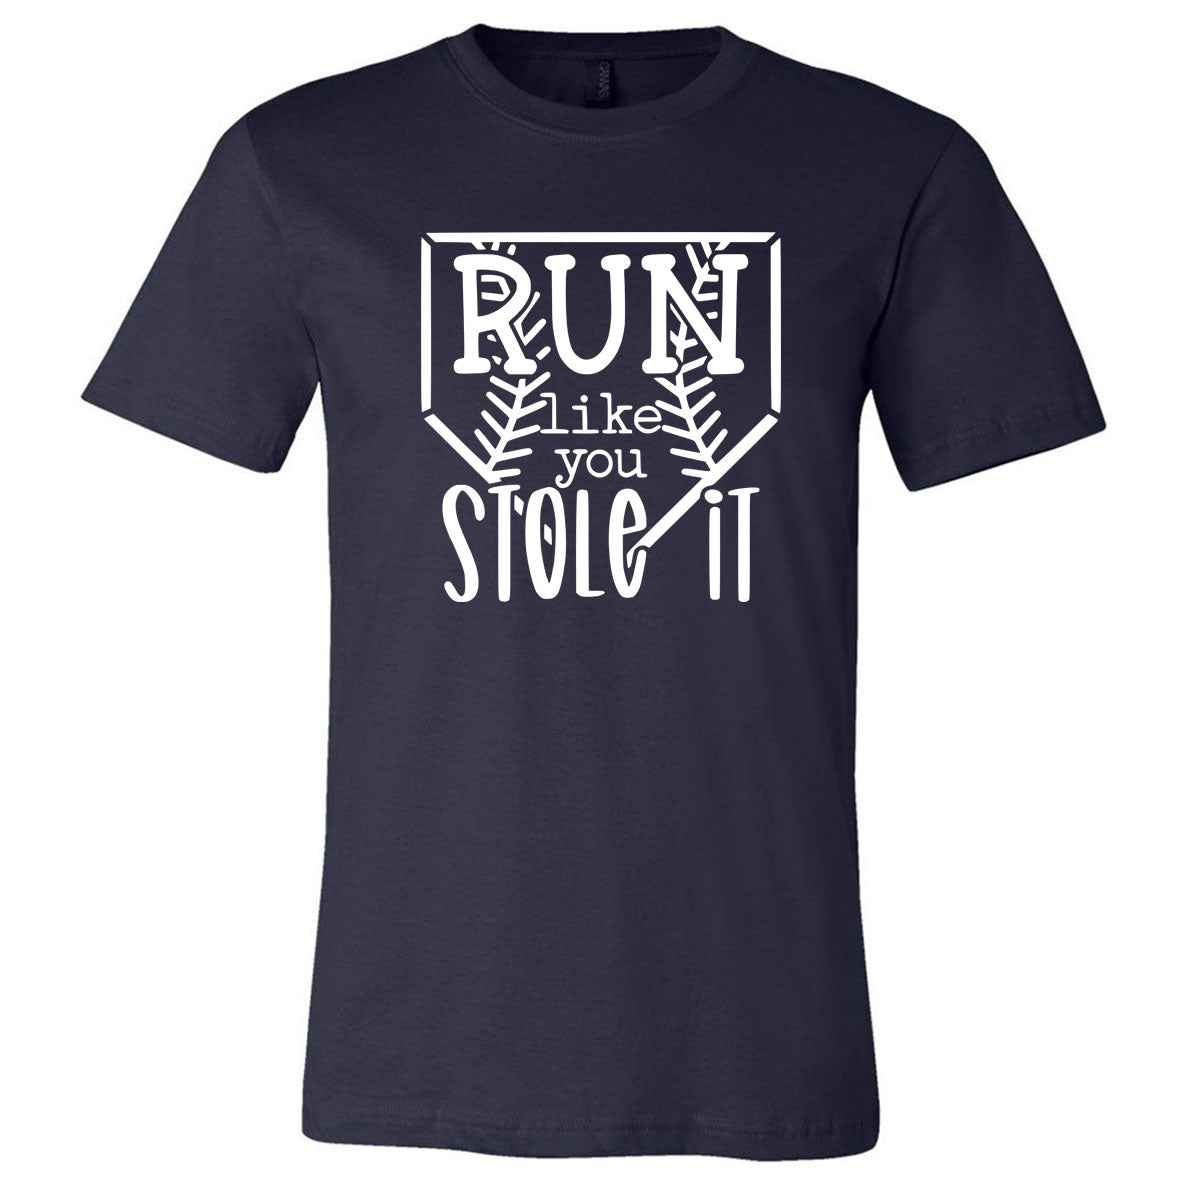 Run Like You Stole It - Short Sleeve Tee - Southern Grace Creations